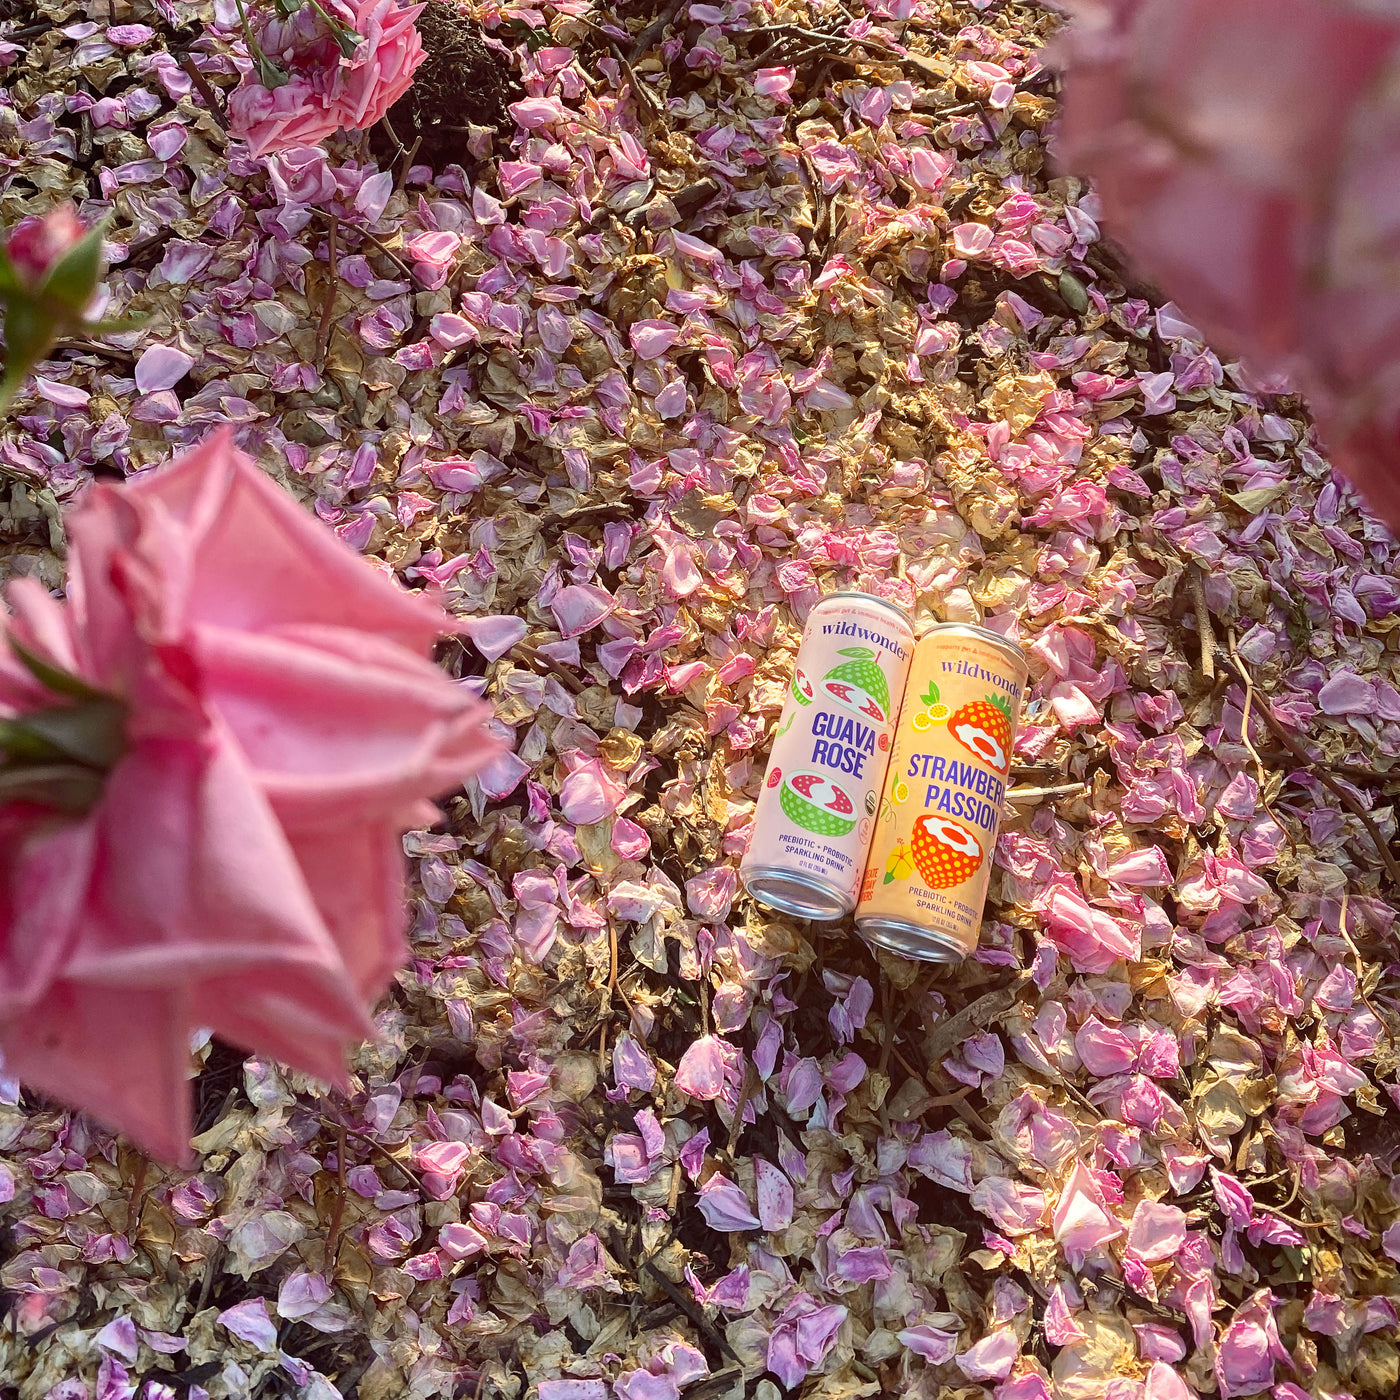 Cans of Guava Rose and Strawberry Passion laying in a field of flower petals.